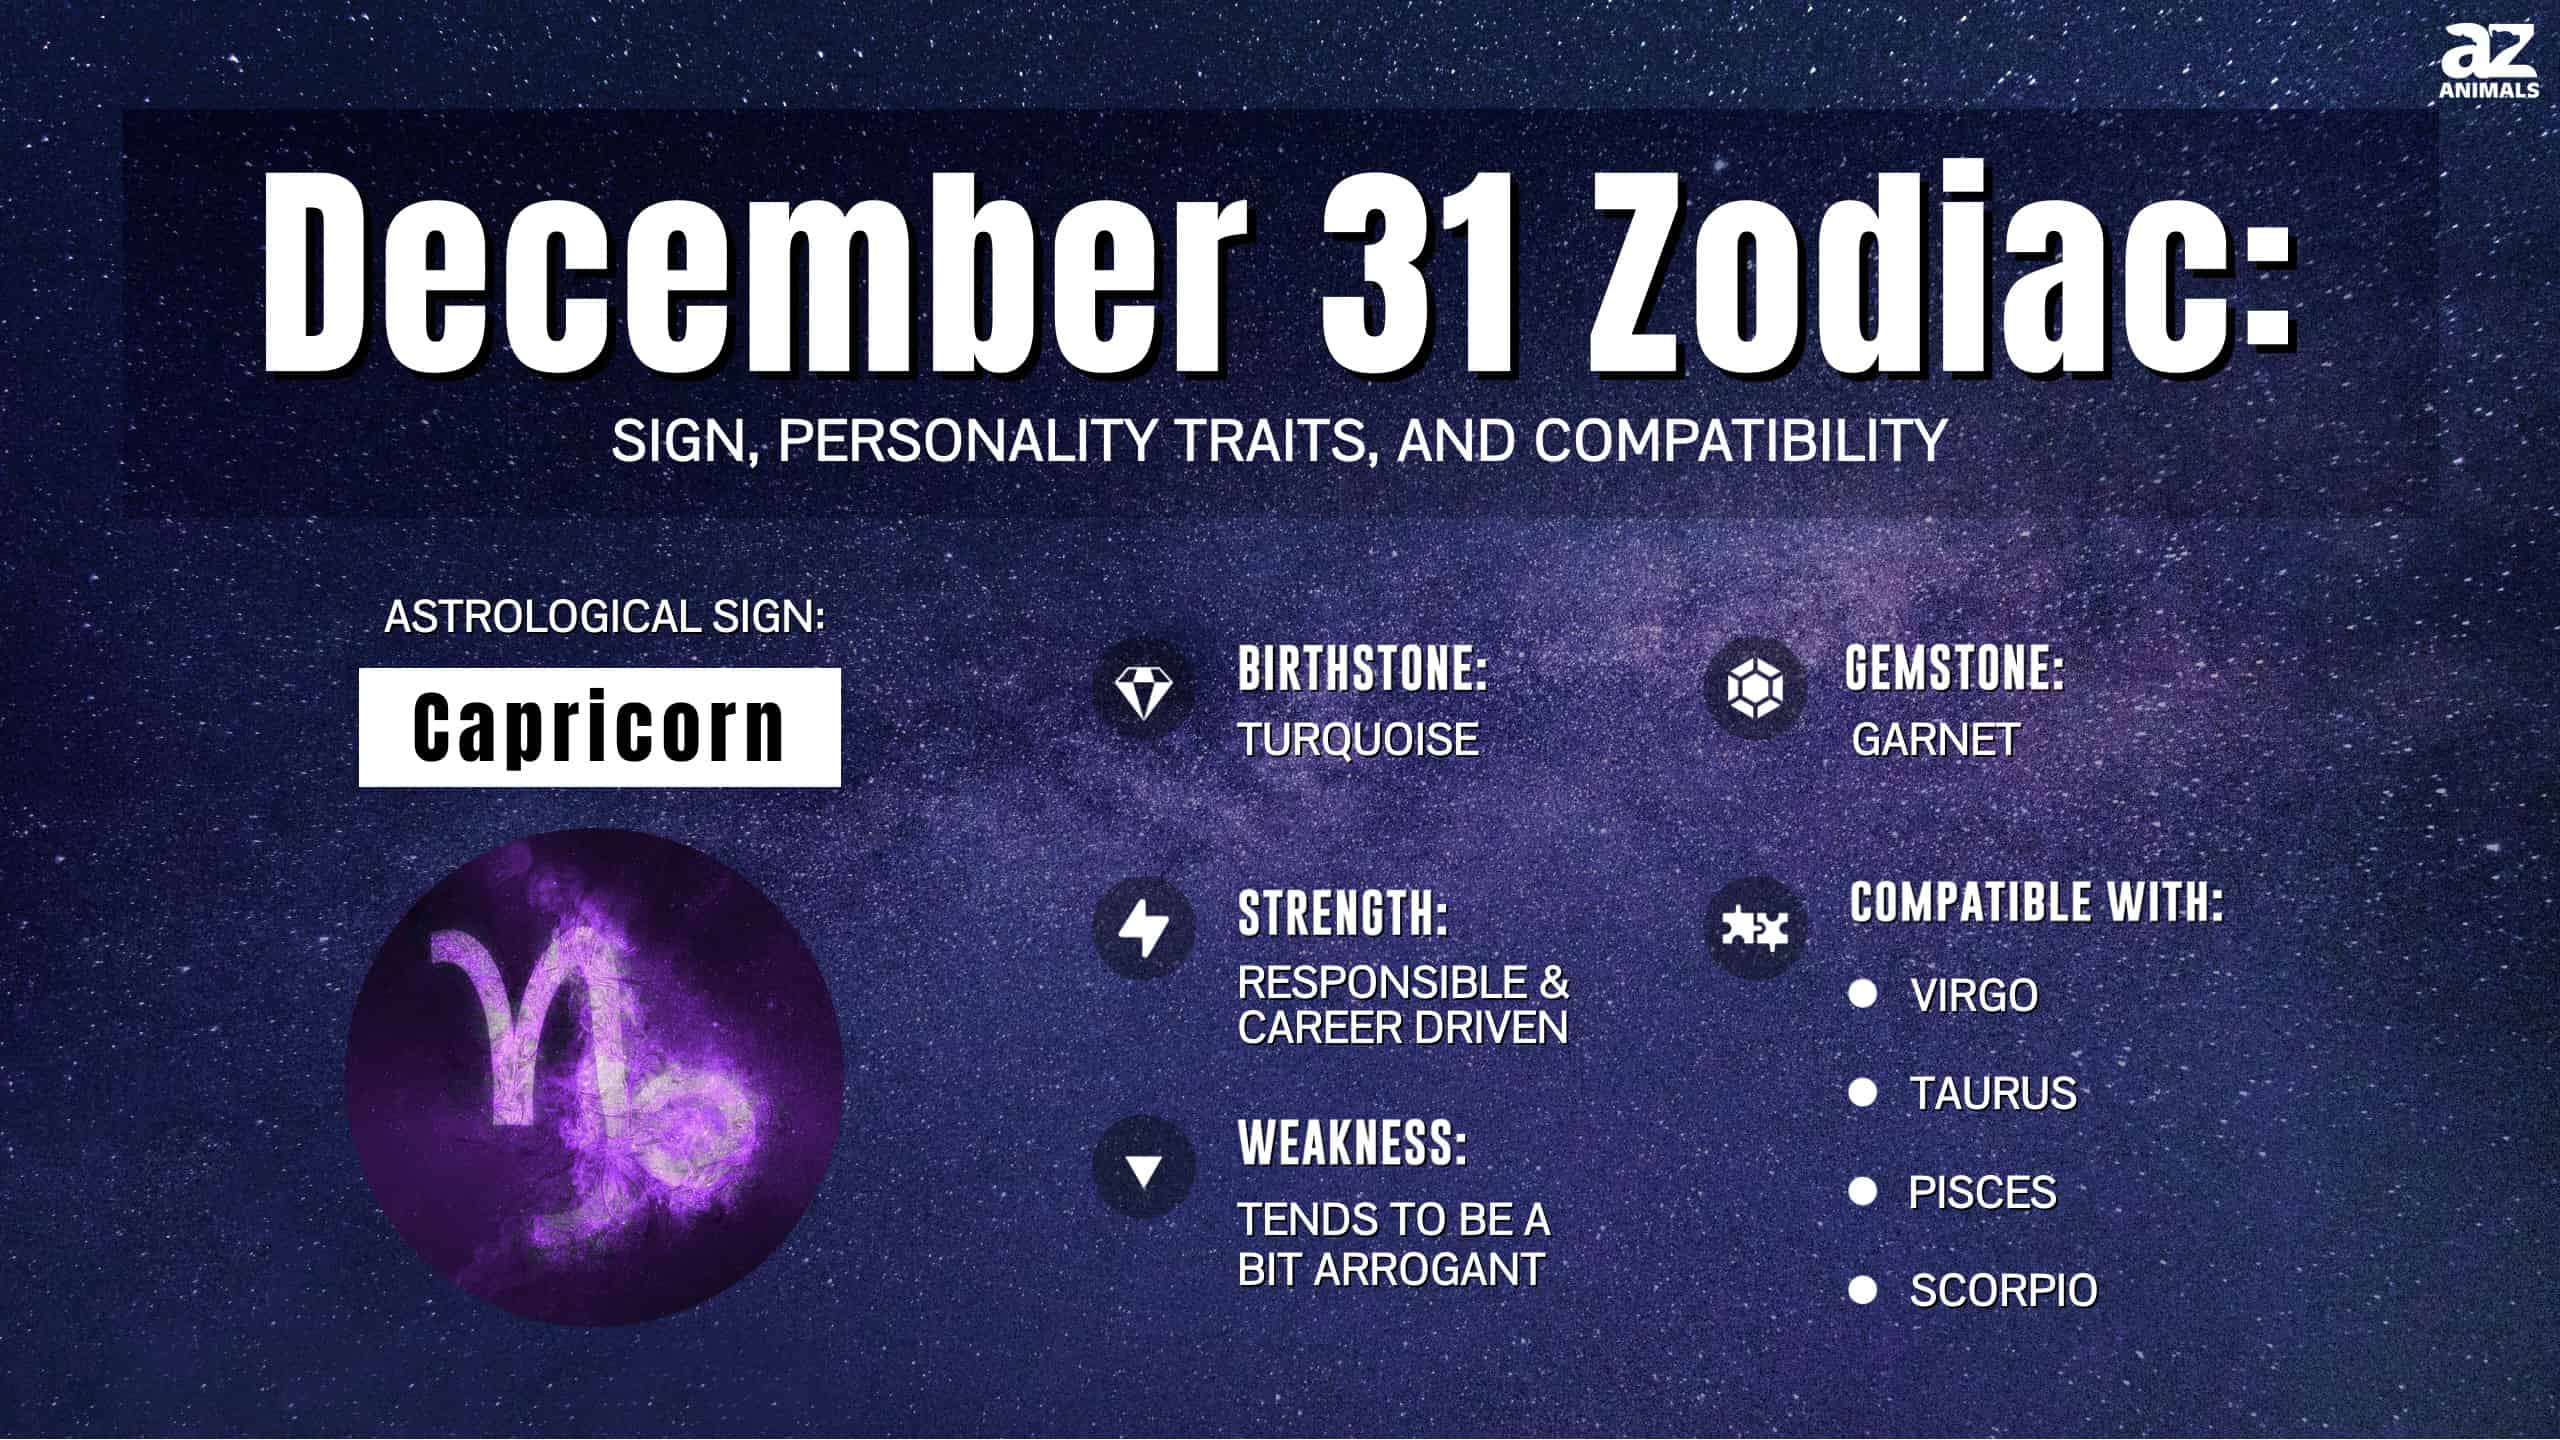 December 31 Zodiac: Sign, Personality Traits, and Compatibility